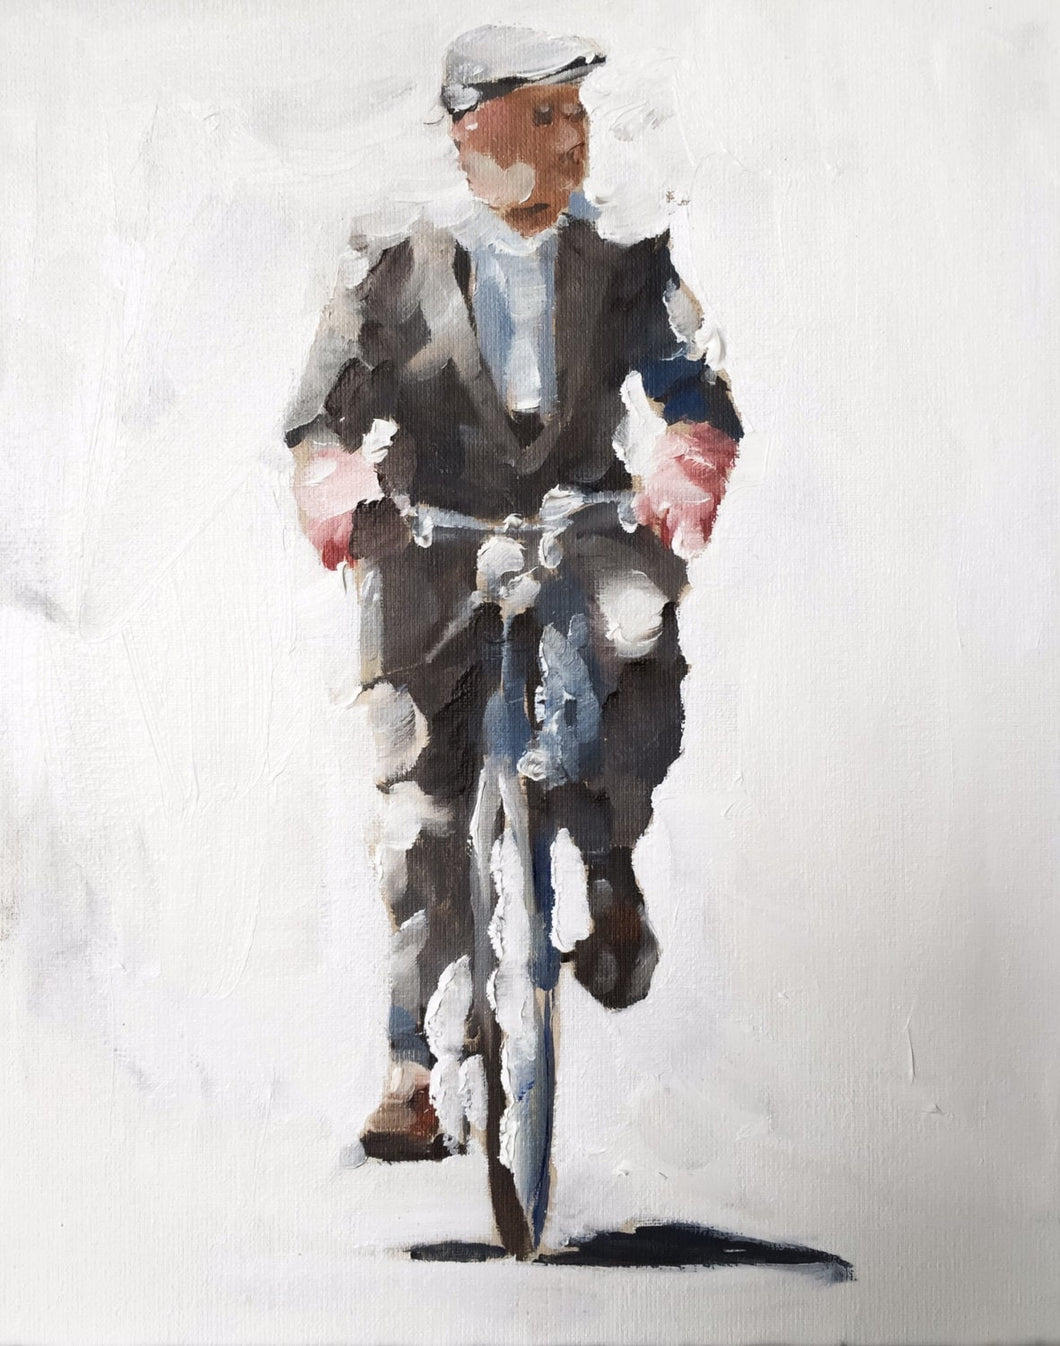 Man Cycling Painting, Prints, Posters, Originals, Commissions, Fine Art - from original oil painting by James Coates